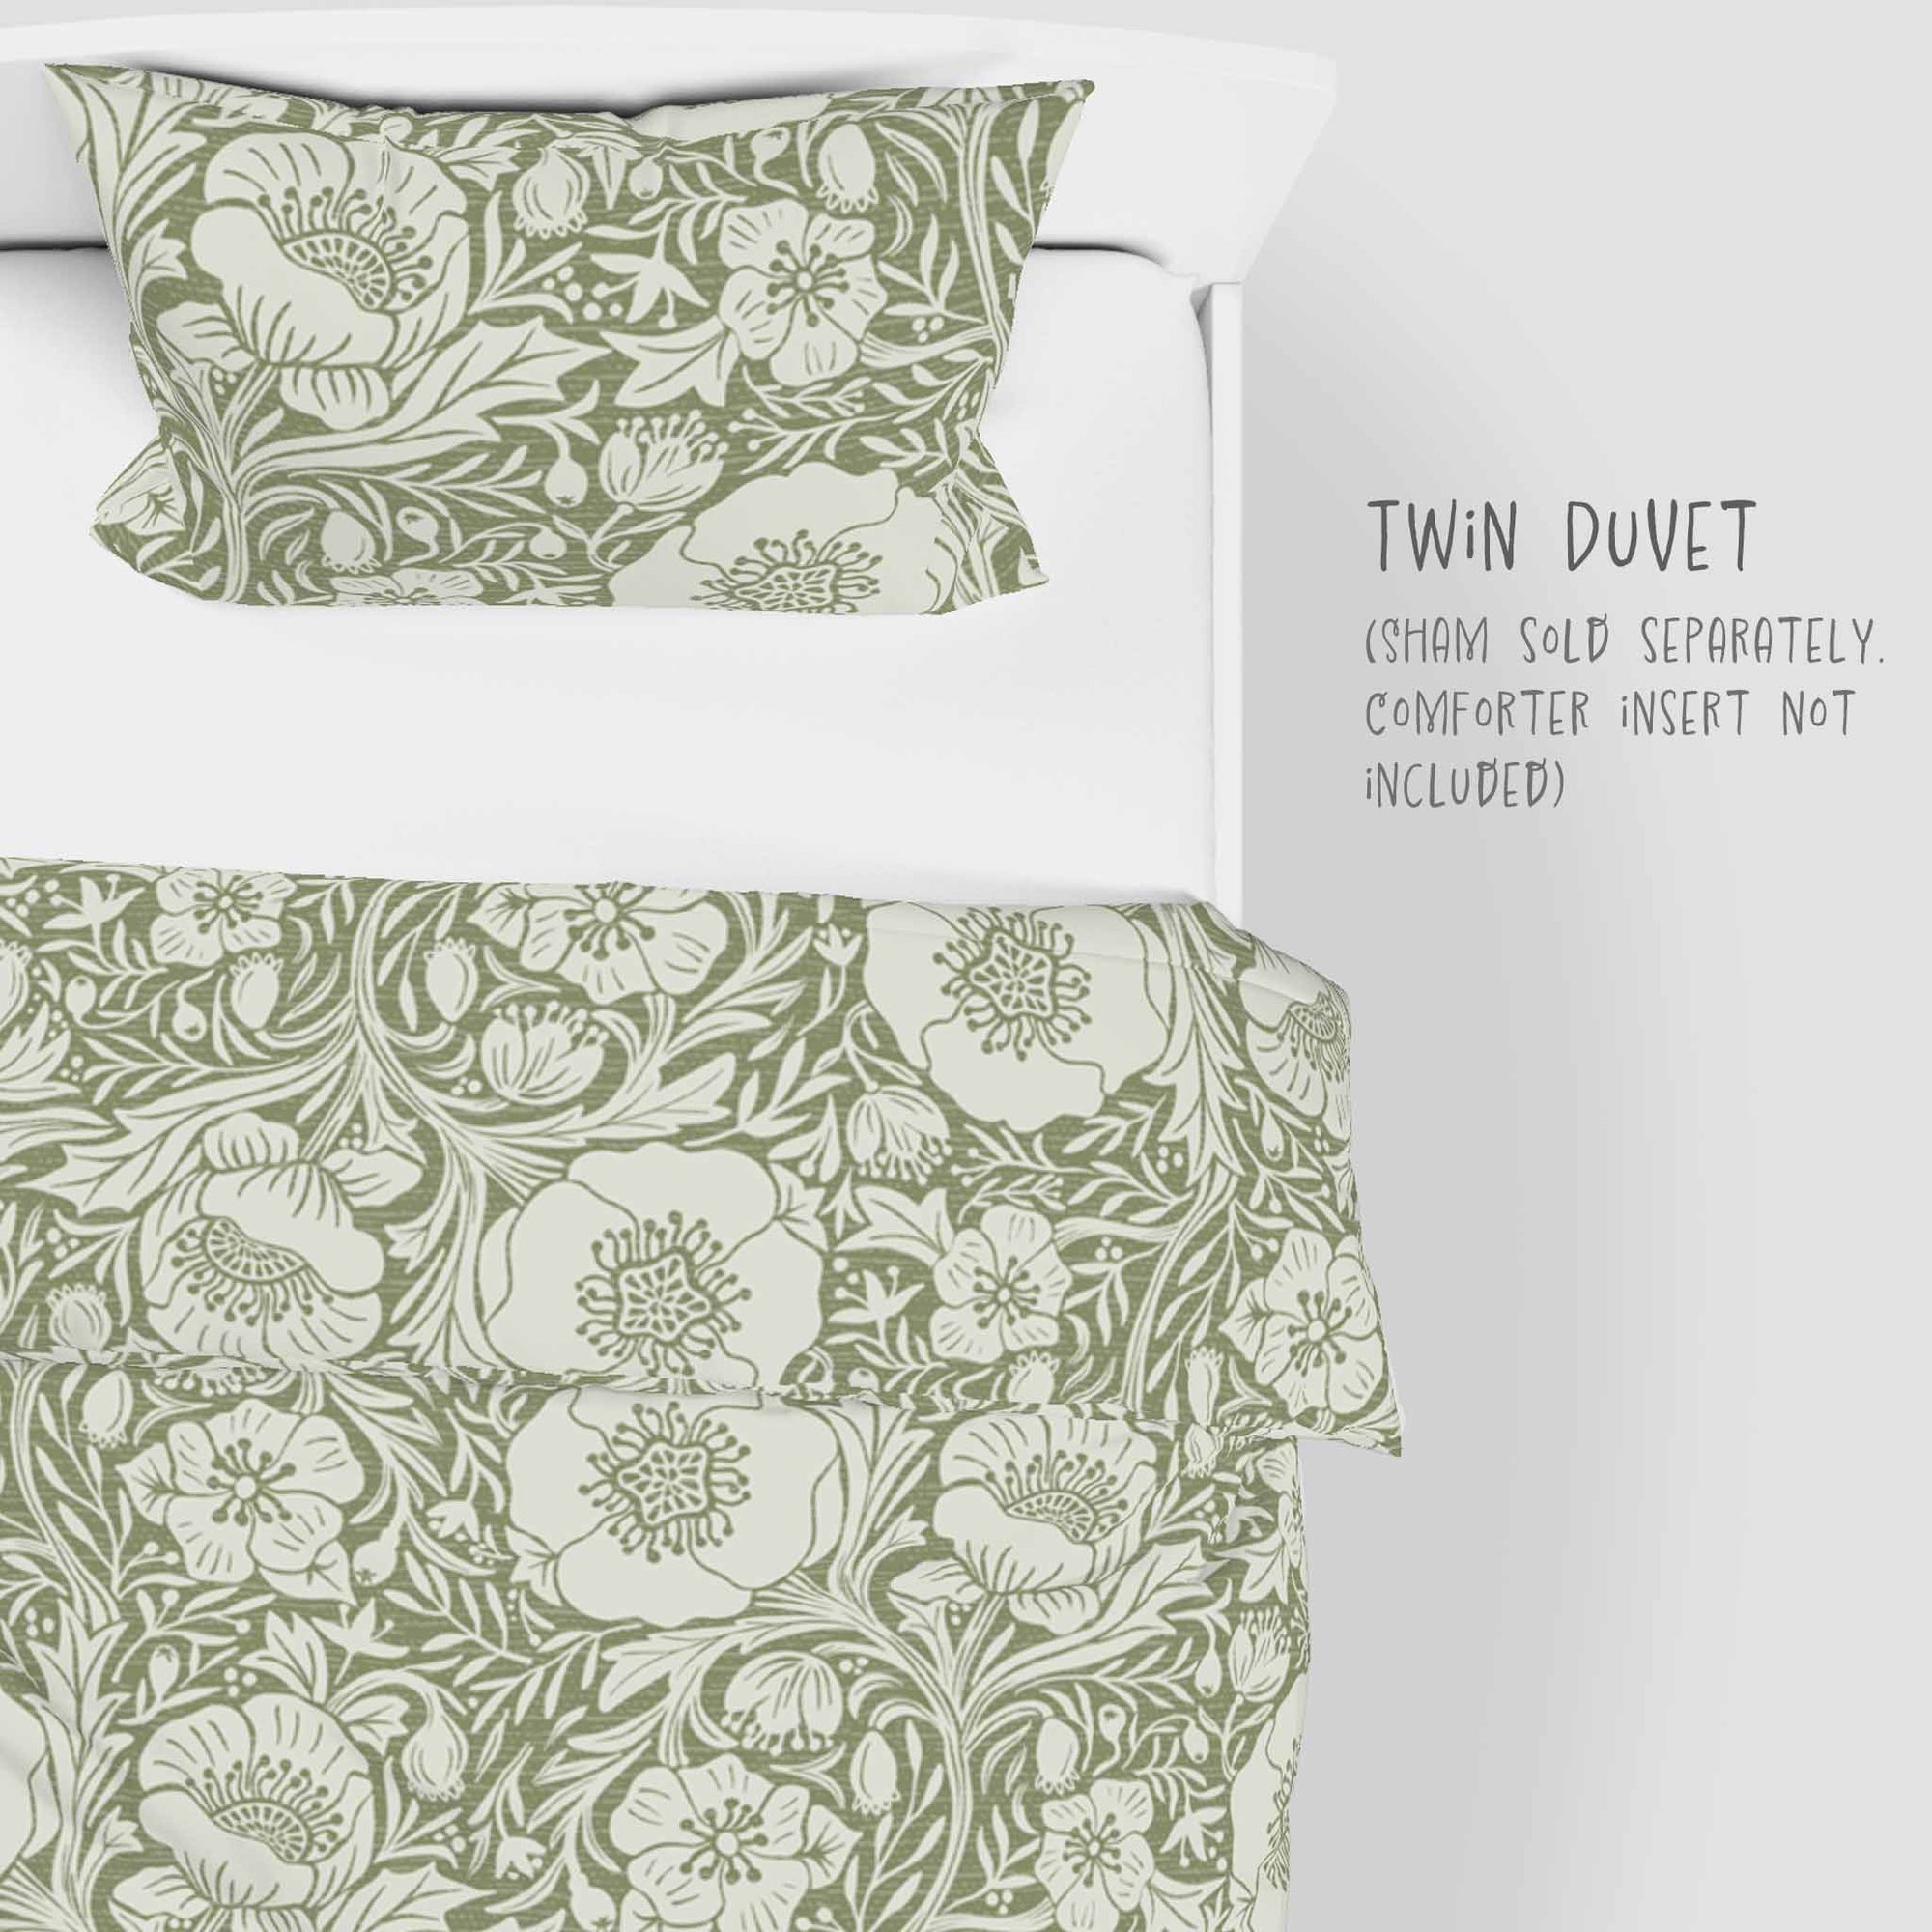 Poppies on sage background 100% Cotton Duvet Cover: Twin and Twin XL sizes.